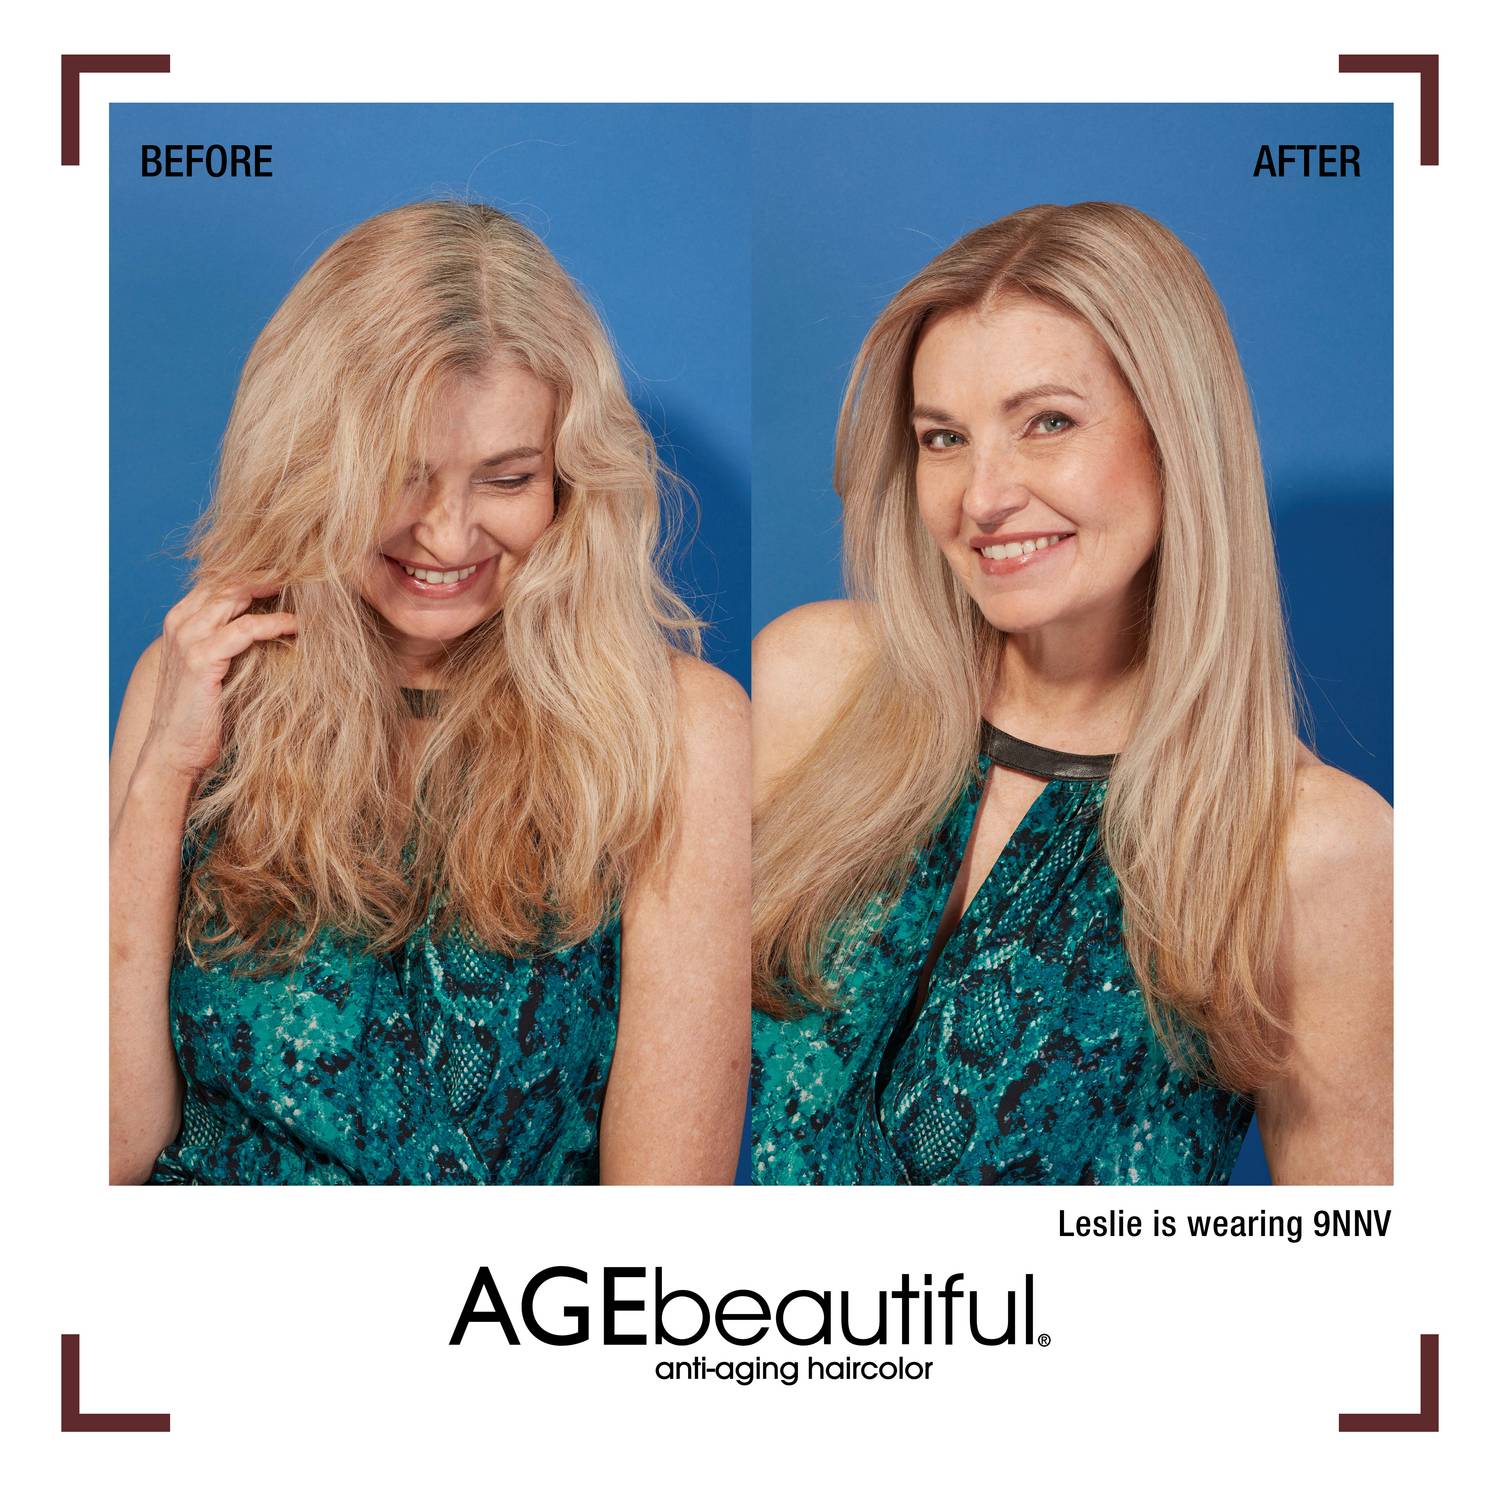 AGEbeautiful hair color before and after 9NNV Light Intense Neutral Violet Blonde